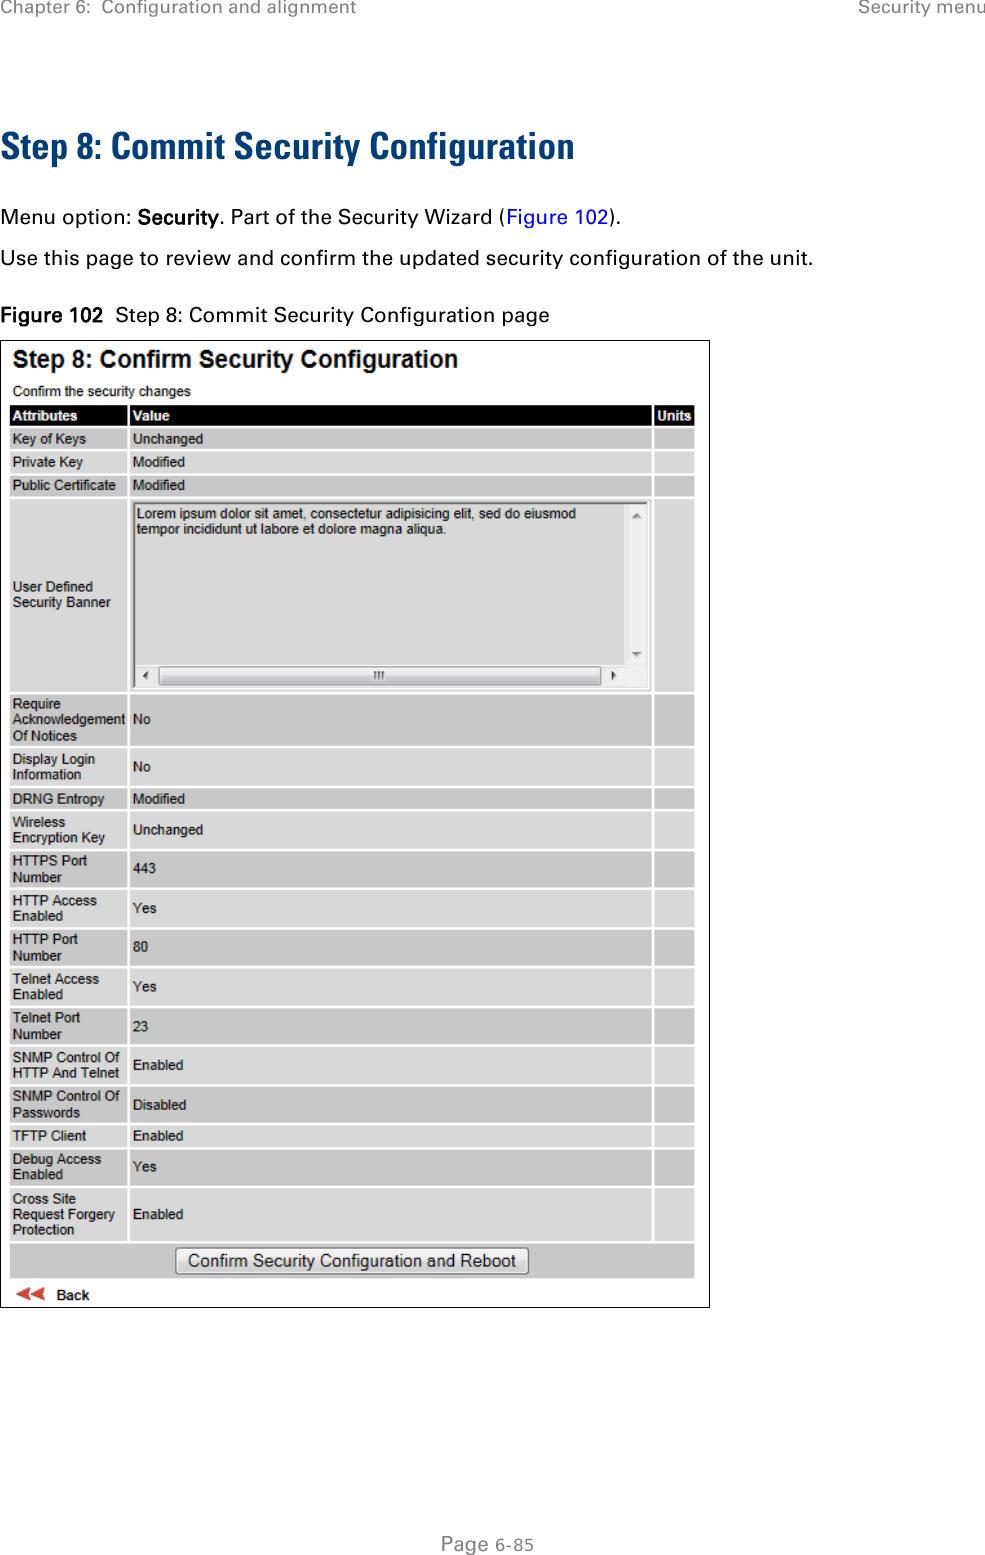 Chapter 6:  Configuration and alignment Security menu  Step 8: Commit Security Configuration Menu option: Security. Part of the Security Wizard (Figure 102). Use this page to review and confirm the updated security configuration of the unit. Figure 102  Step 8: Commit Security Configuration page   Page 6-85 